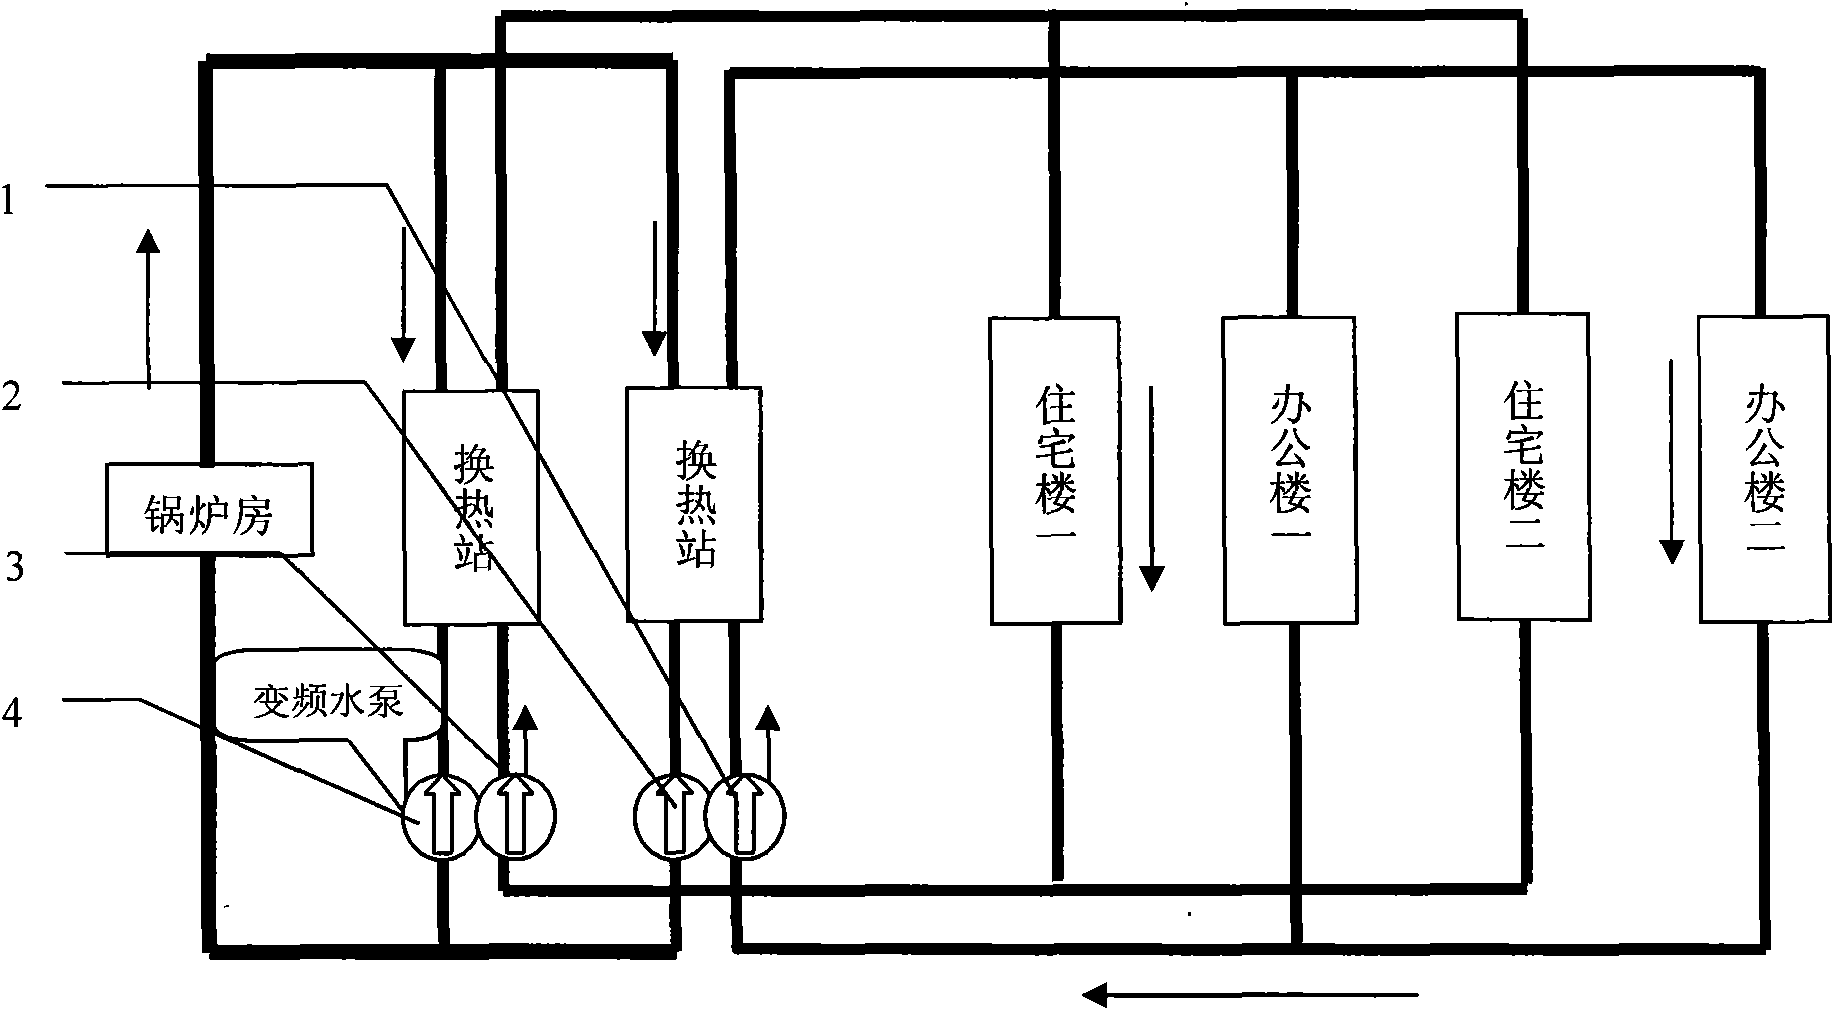 Energy-saving and emission-reducing regulation and control method for urban region boiler room central heating system